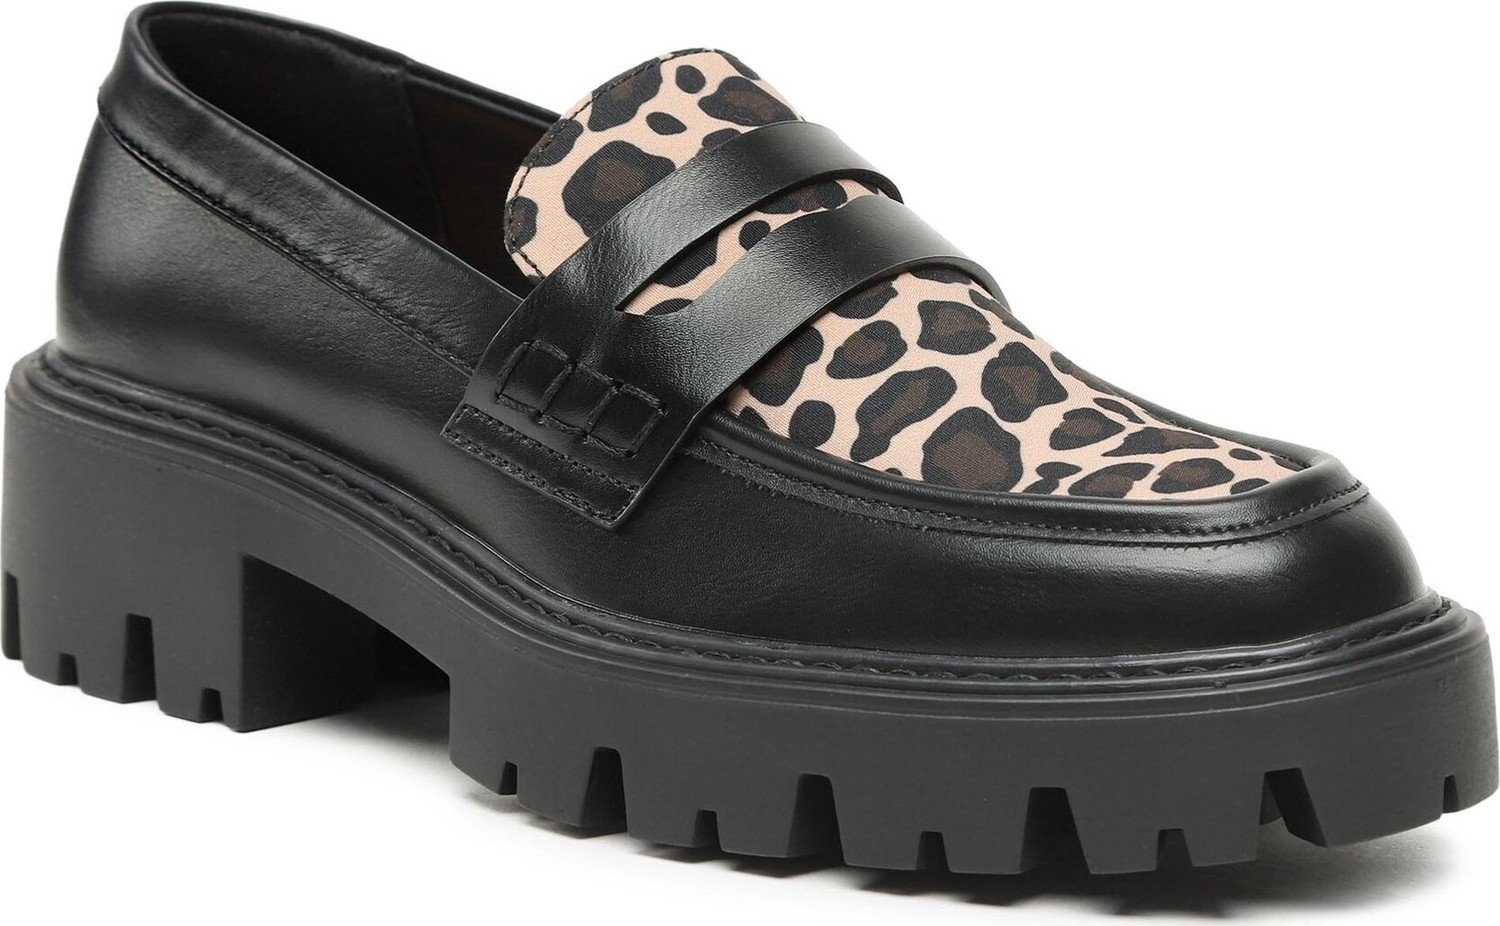 Loafersy ONLY Shoes Onlbetty-4 15288063 Black/Leo Print